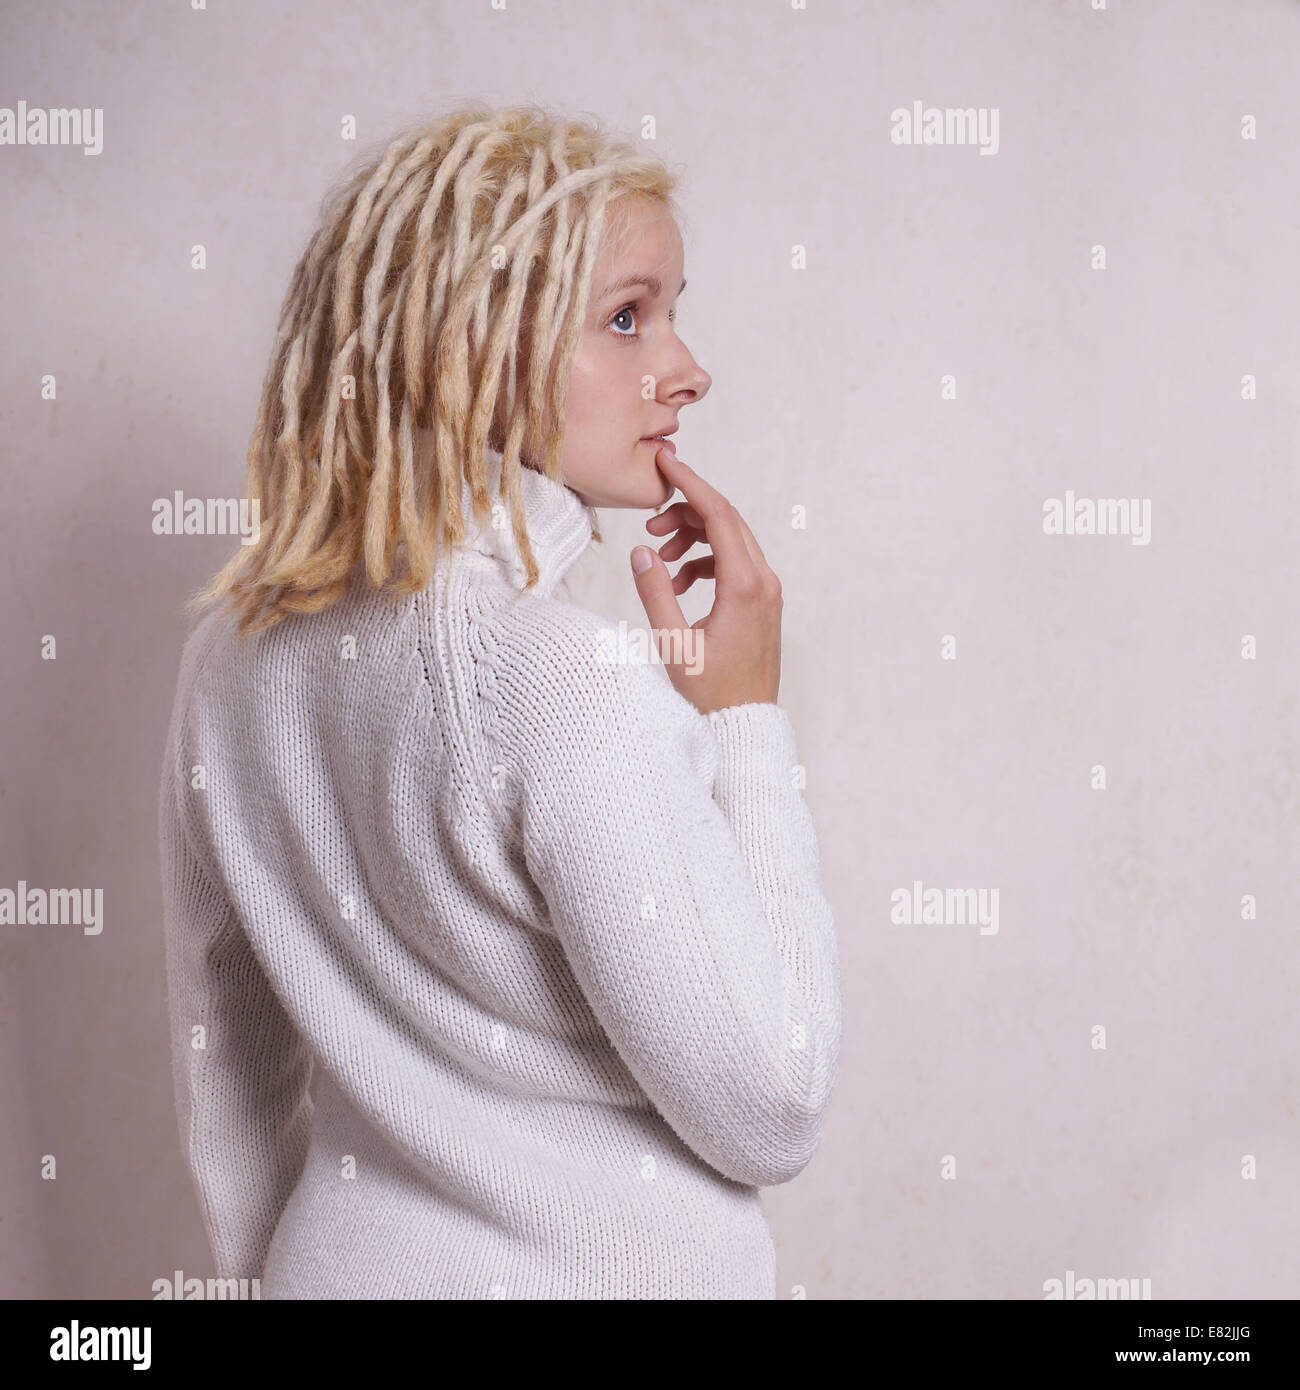 pensive young woman with blonde dreadlocks Stock Photo